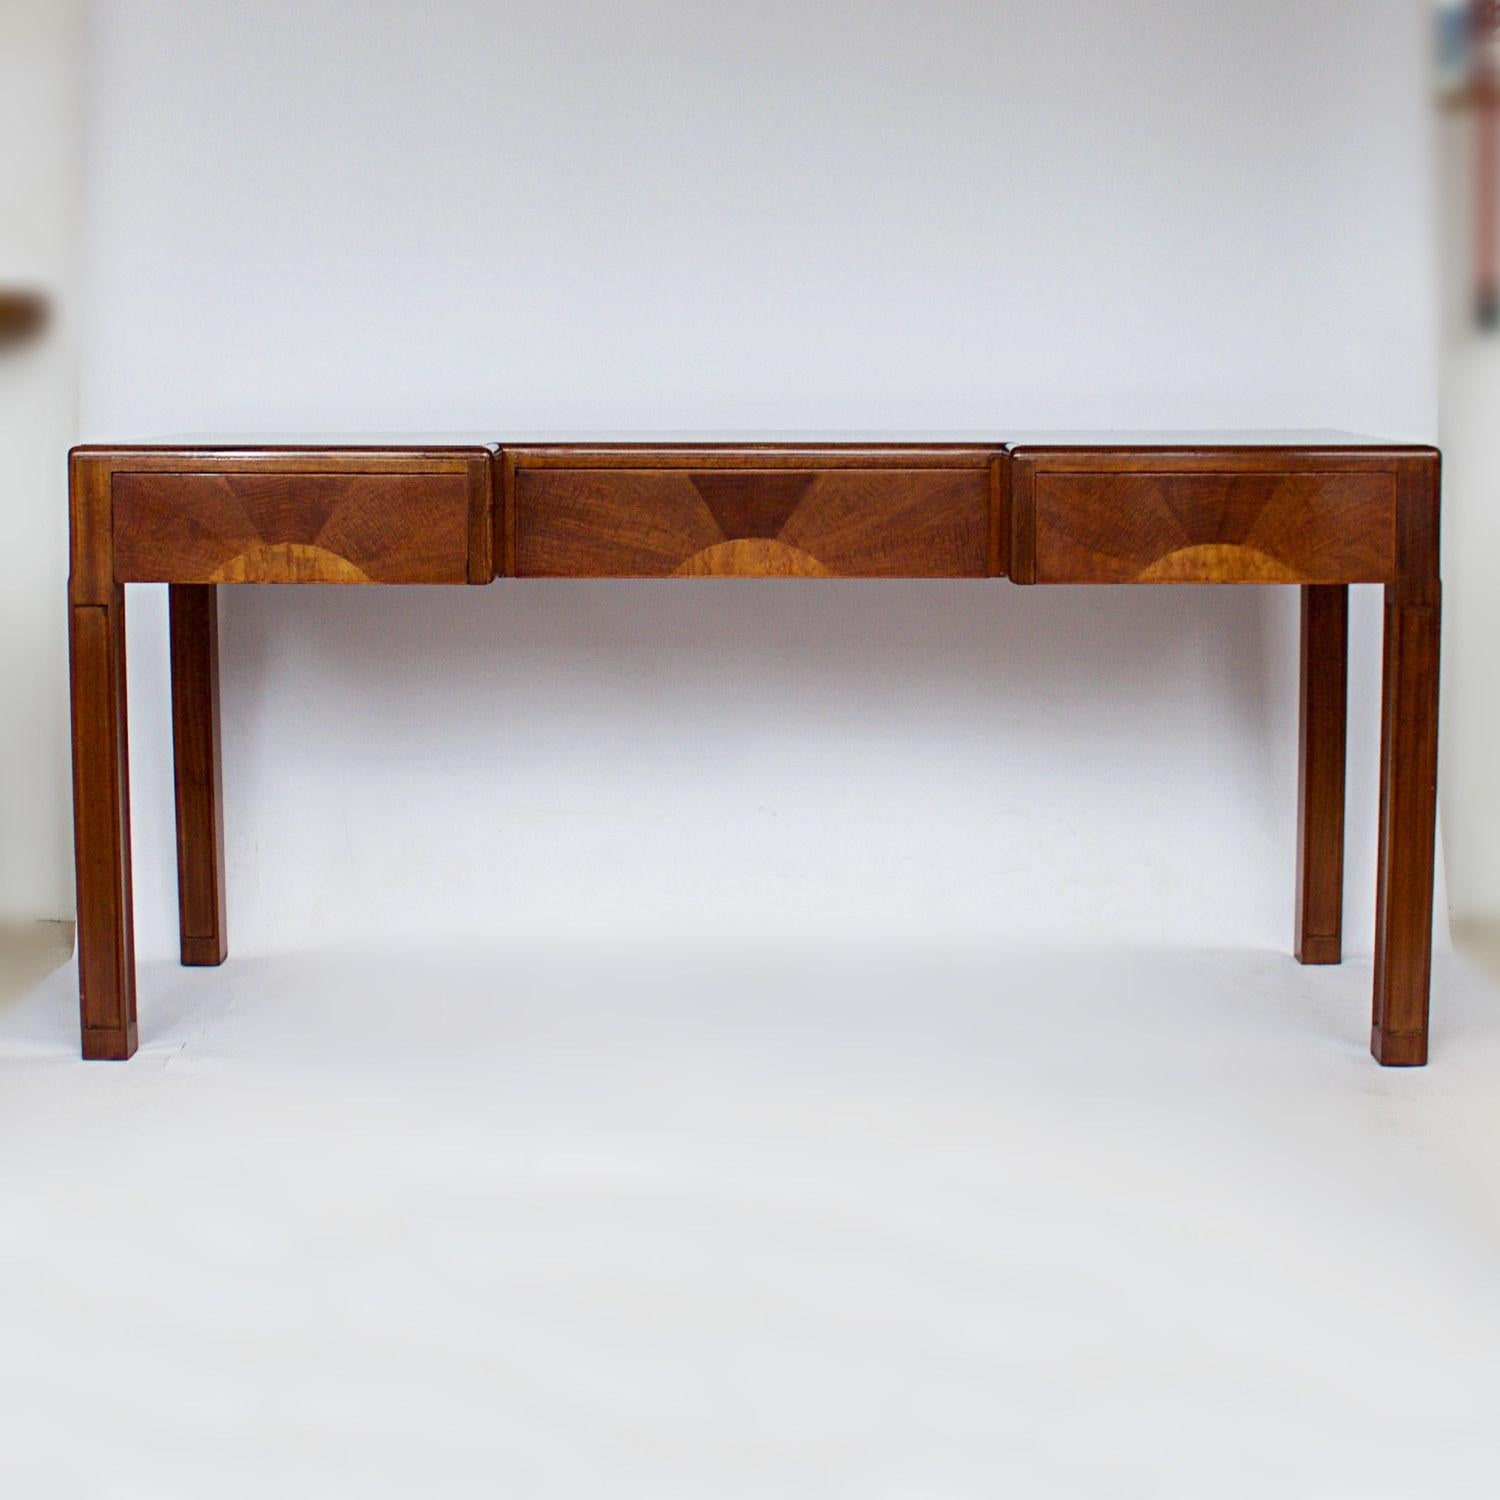 English Art Deco Console Table/Sideboard by Betty Joel Signed and Dated 1929